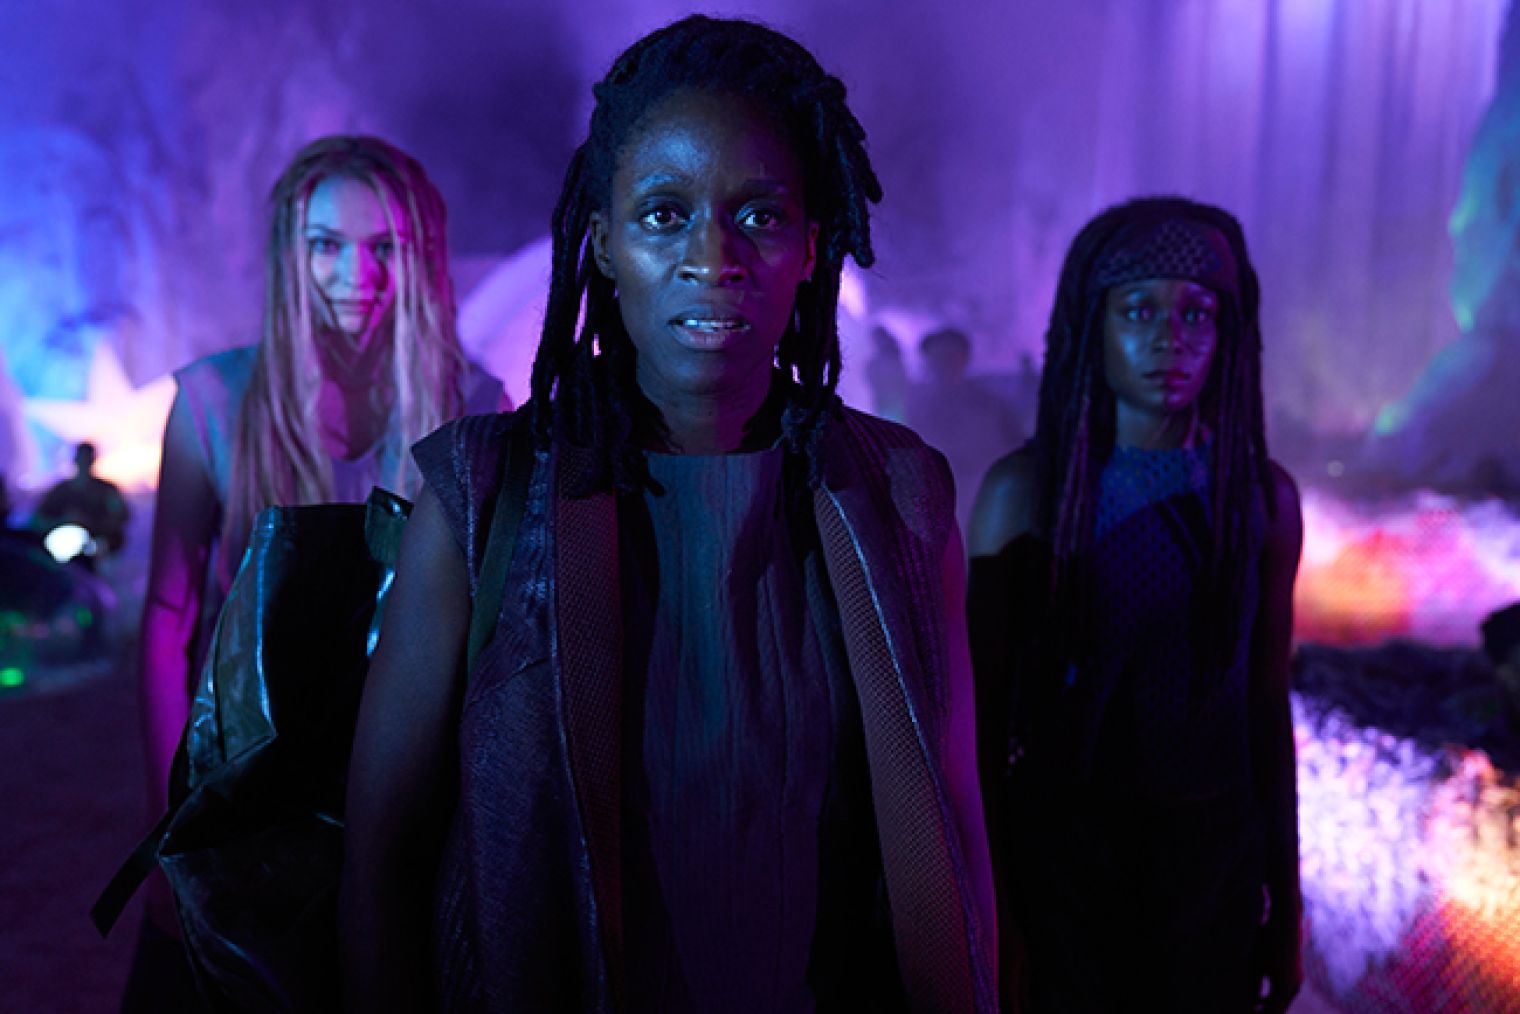 Sharon Duncan-Brewster stars in Sky One's brand new 'Intergalactic' as mob leader Tula Quik